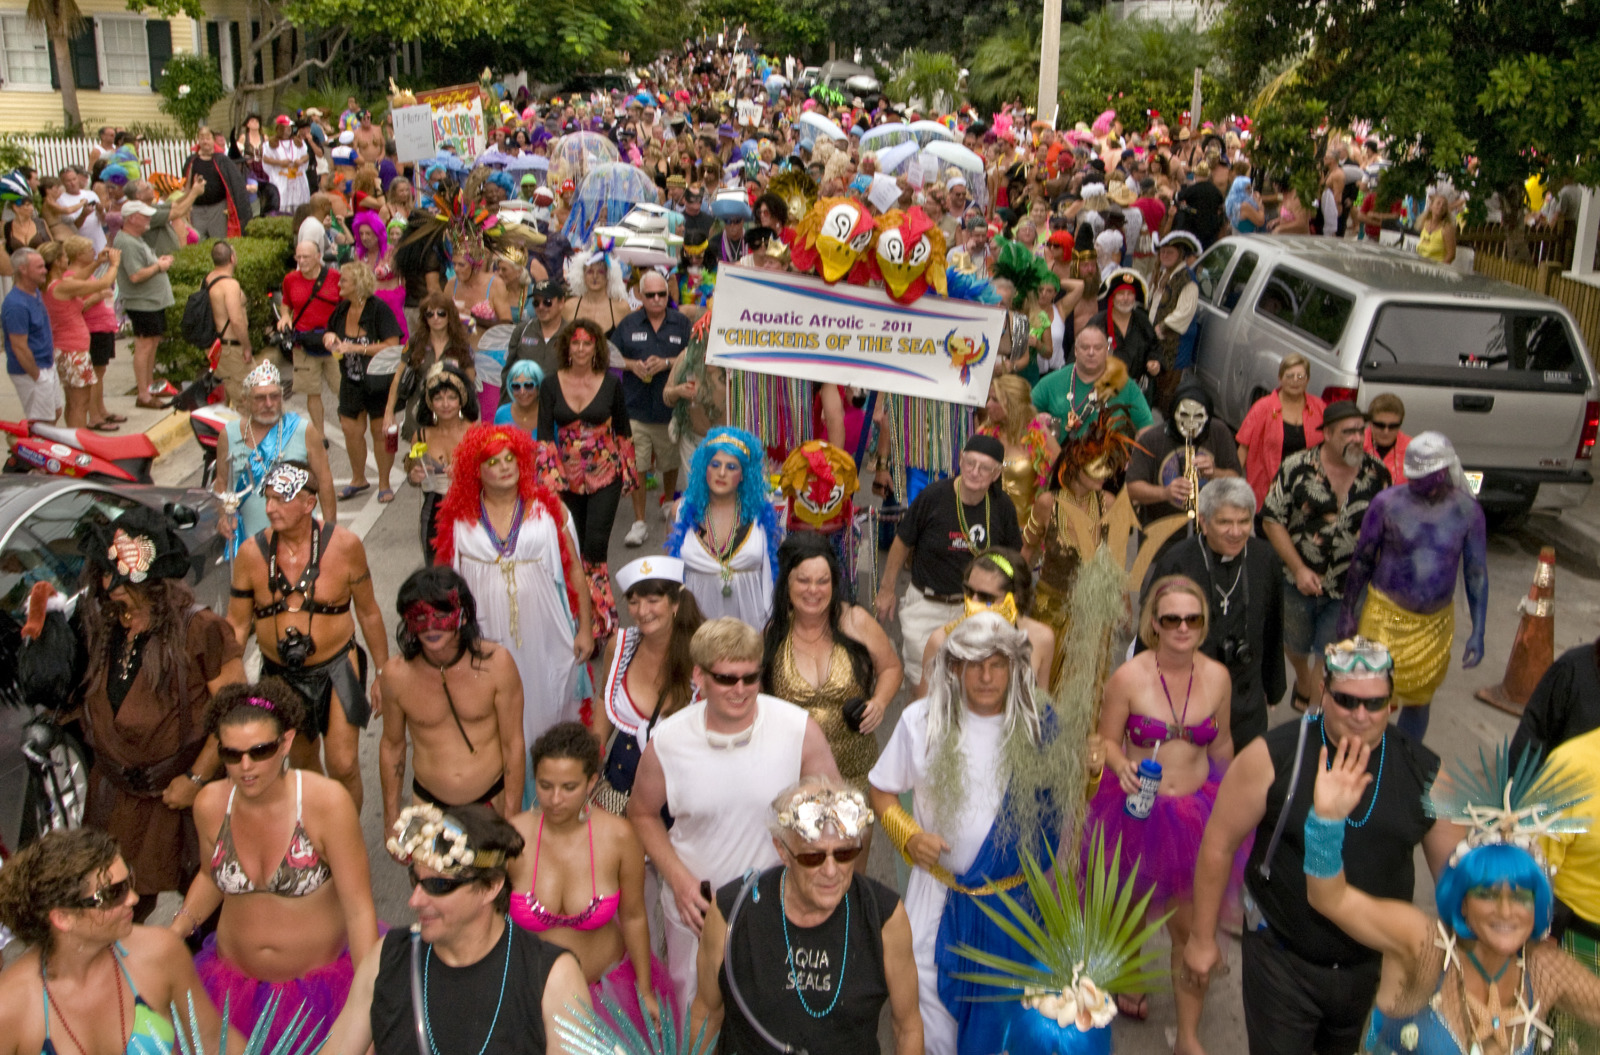 NO MORE NUDITY KEY WEST OFFICIALS EXPECT CHANGES TO FANTASY FEST